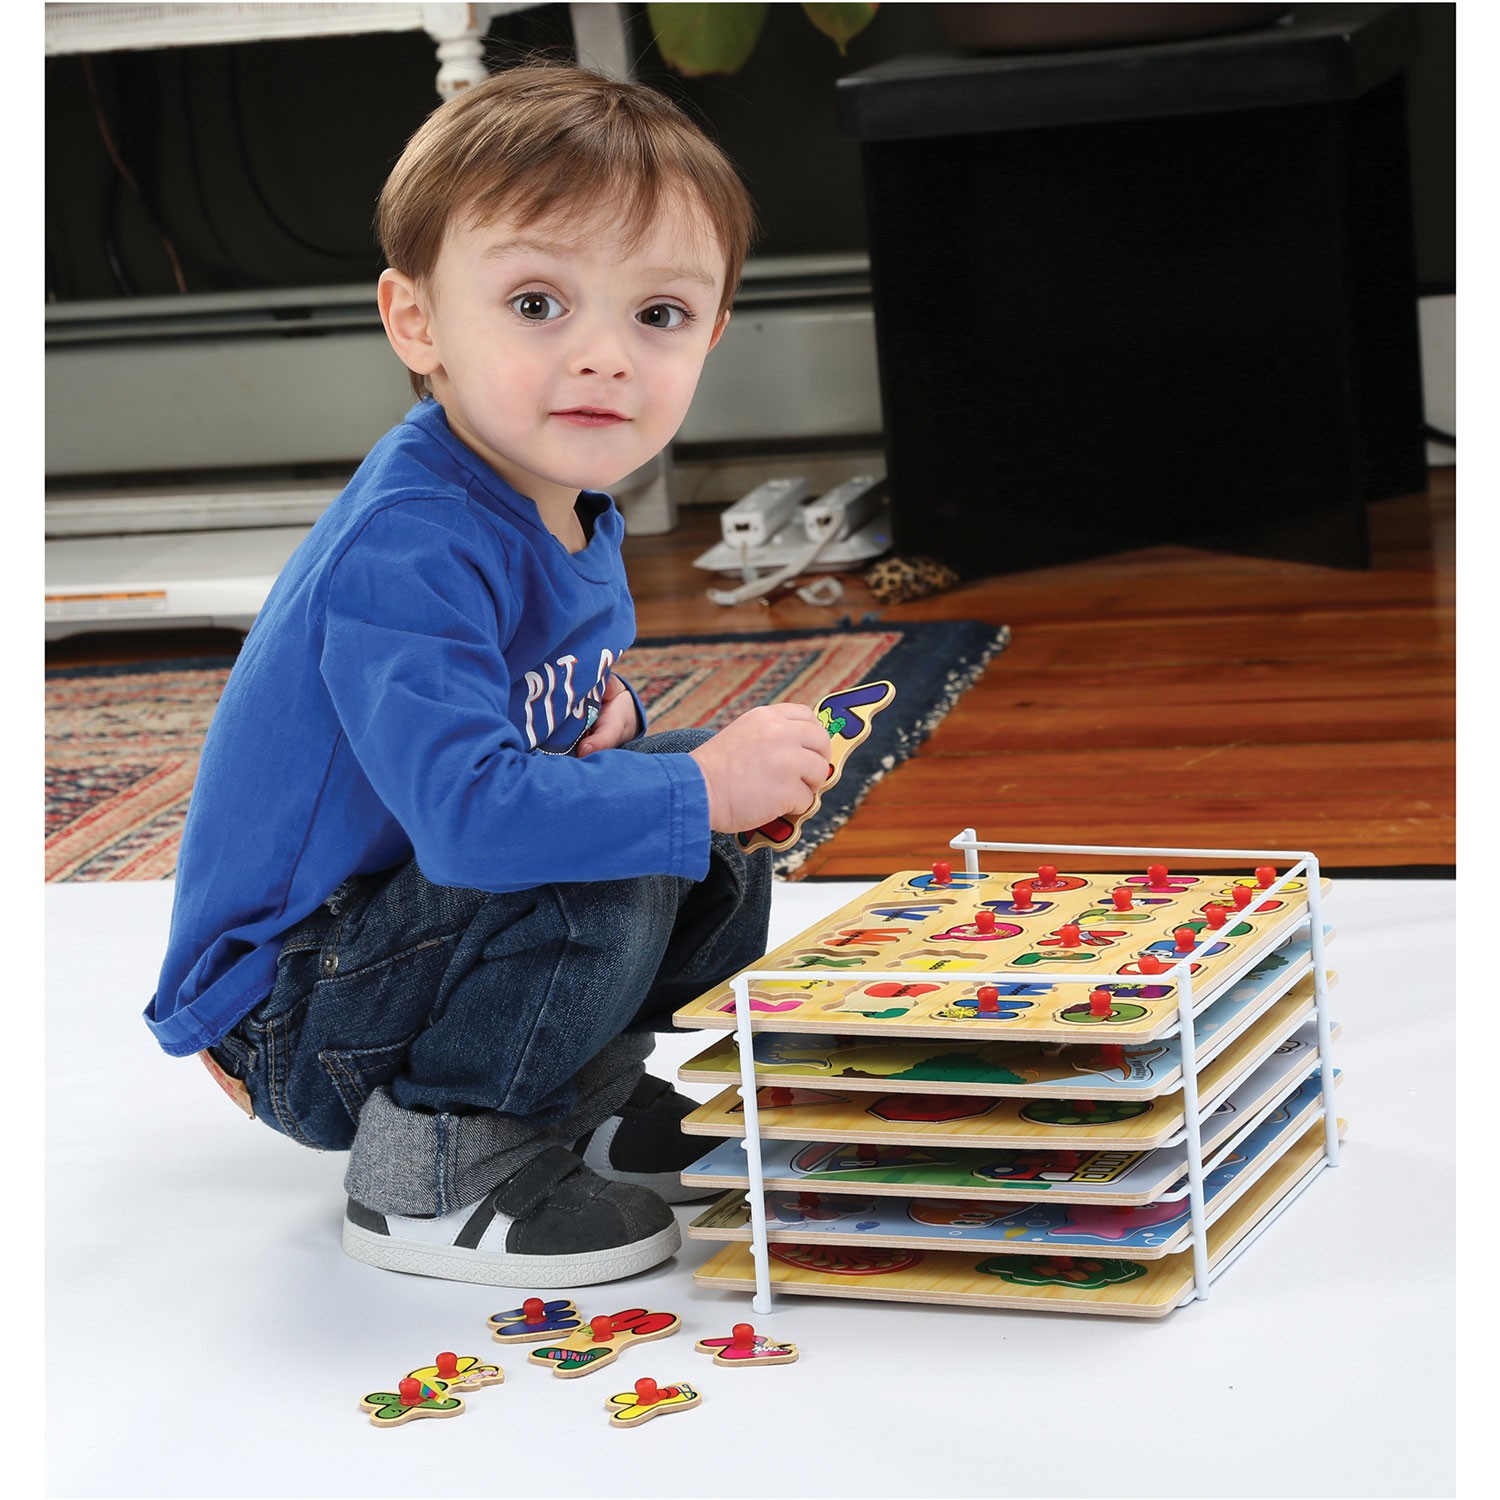 6 Wooden Peg Puzzles with Wire Storage Rack Set - ABC, Numbers, Shapes